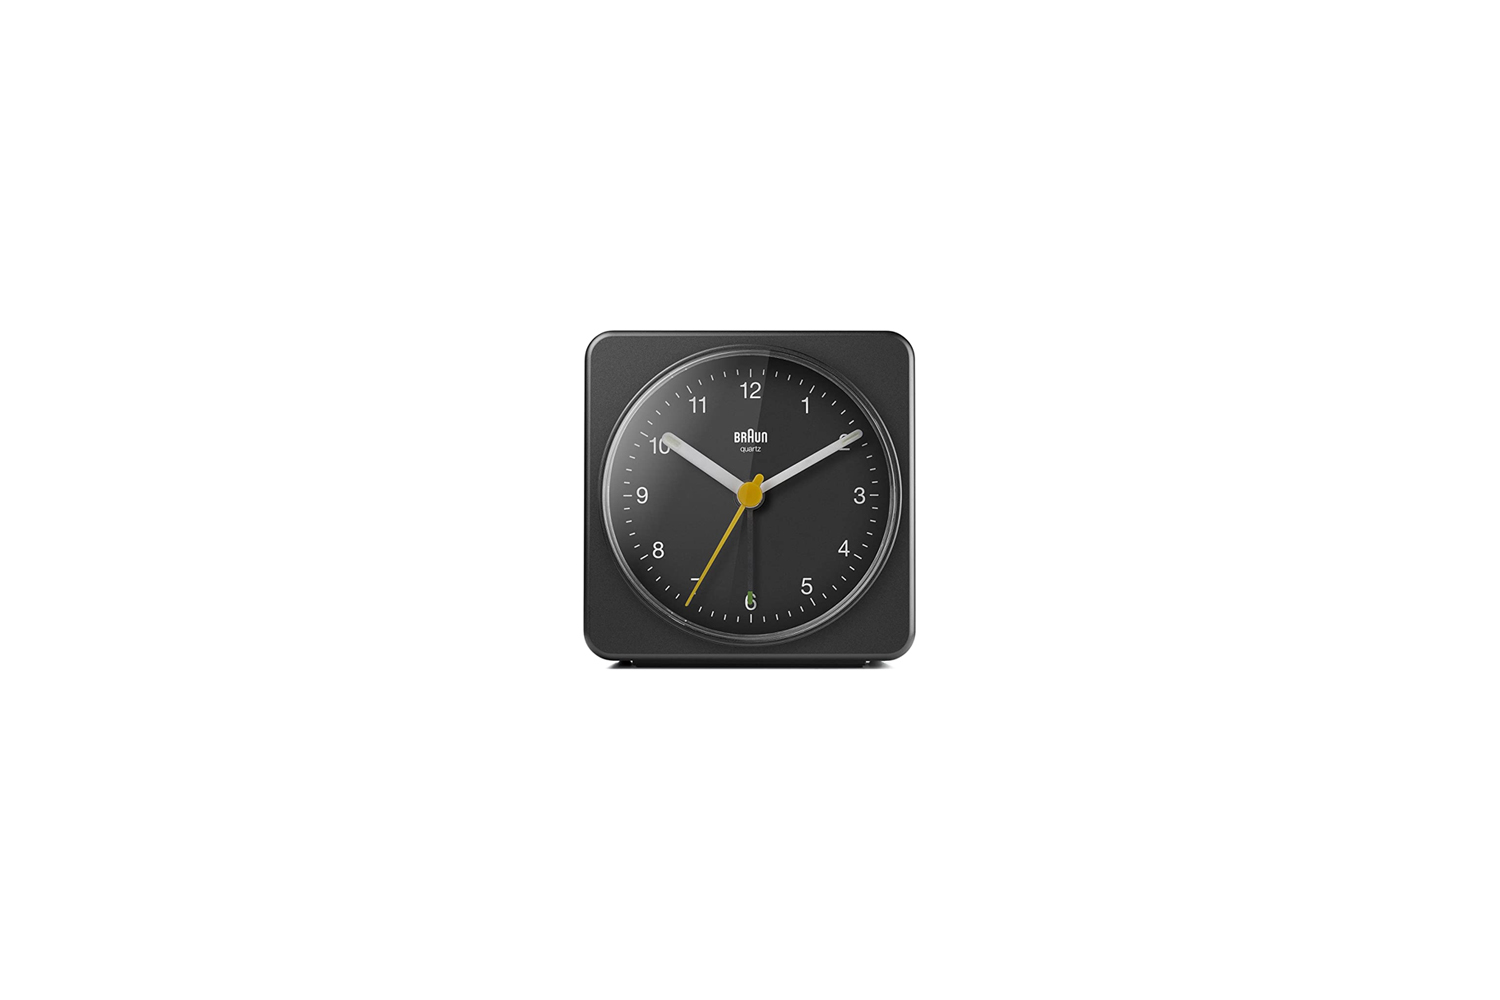 the braun classic analogue clock in black is \$\2\1.49 on amazon. 19